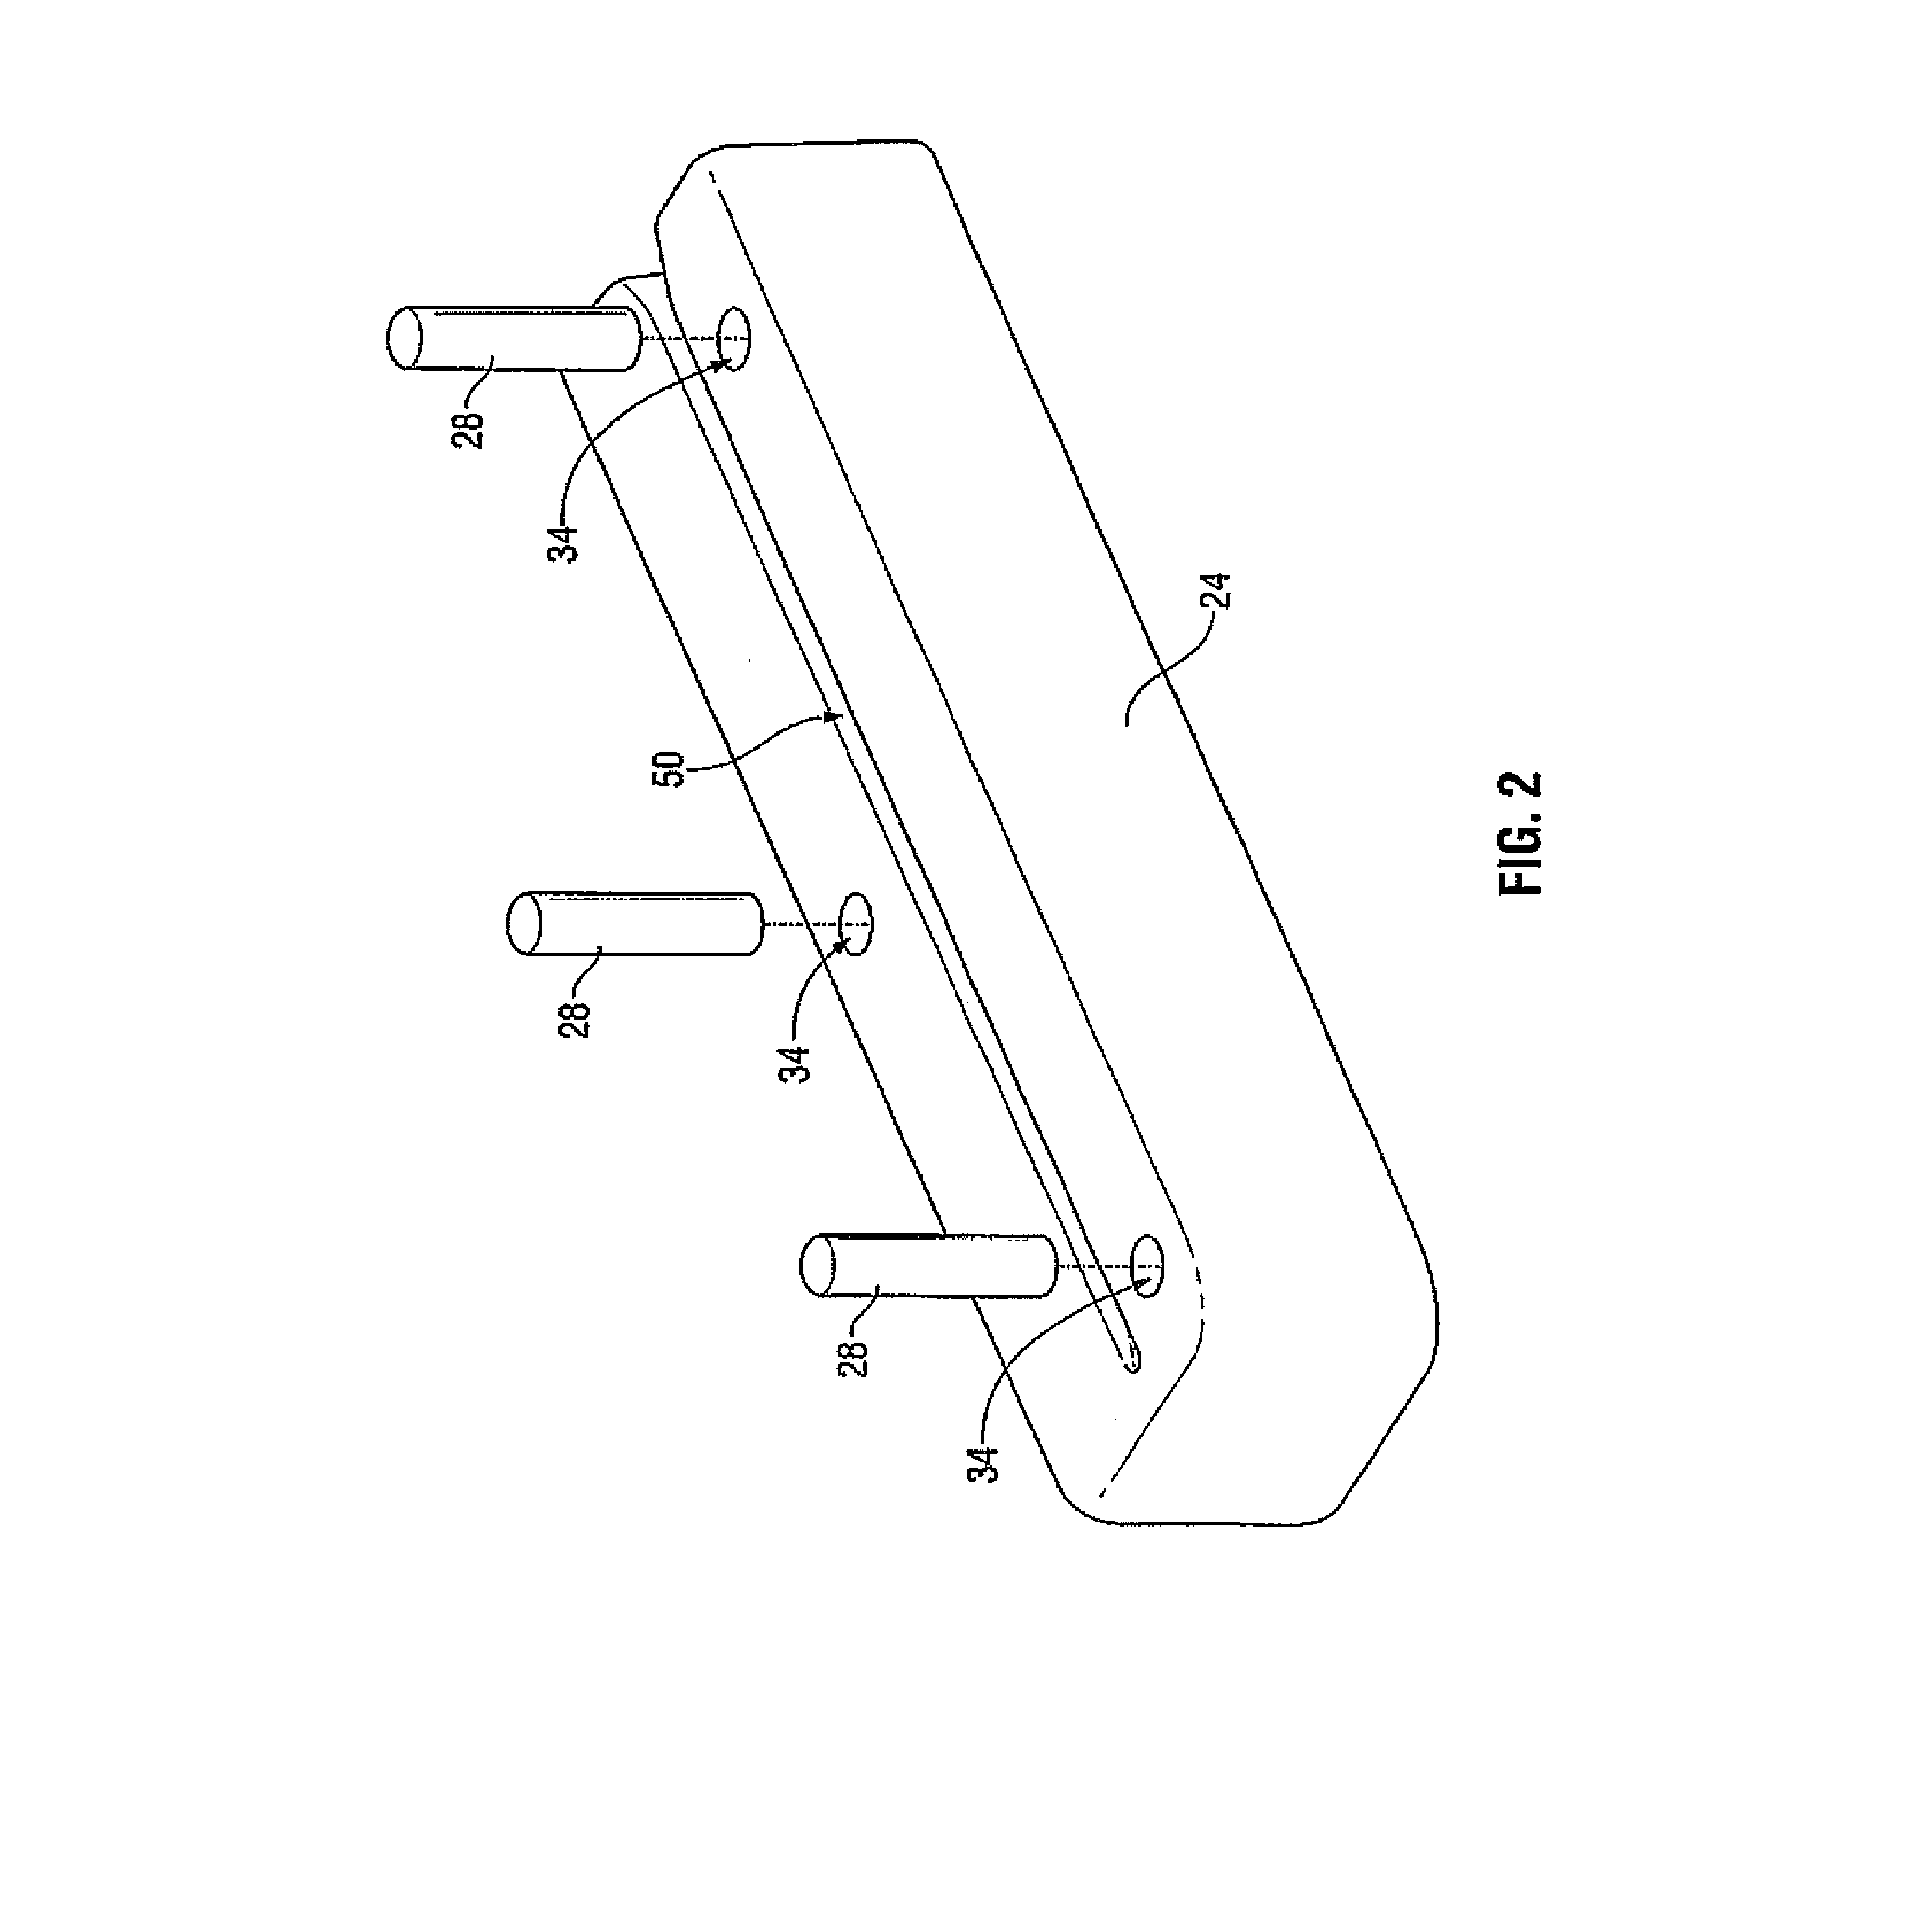 Method For Securing A Stop Member To A Seal Plate Configured For Use With An Electrosurgical Instrument